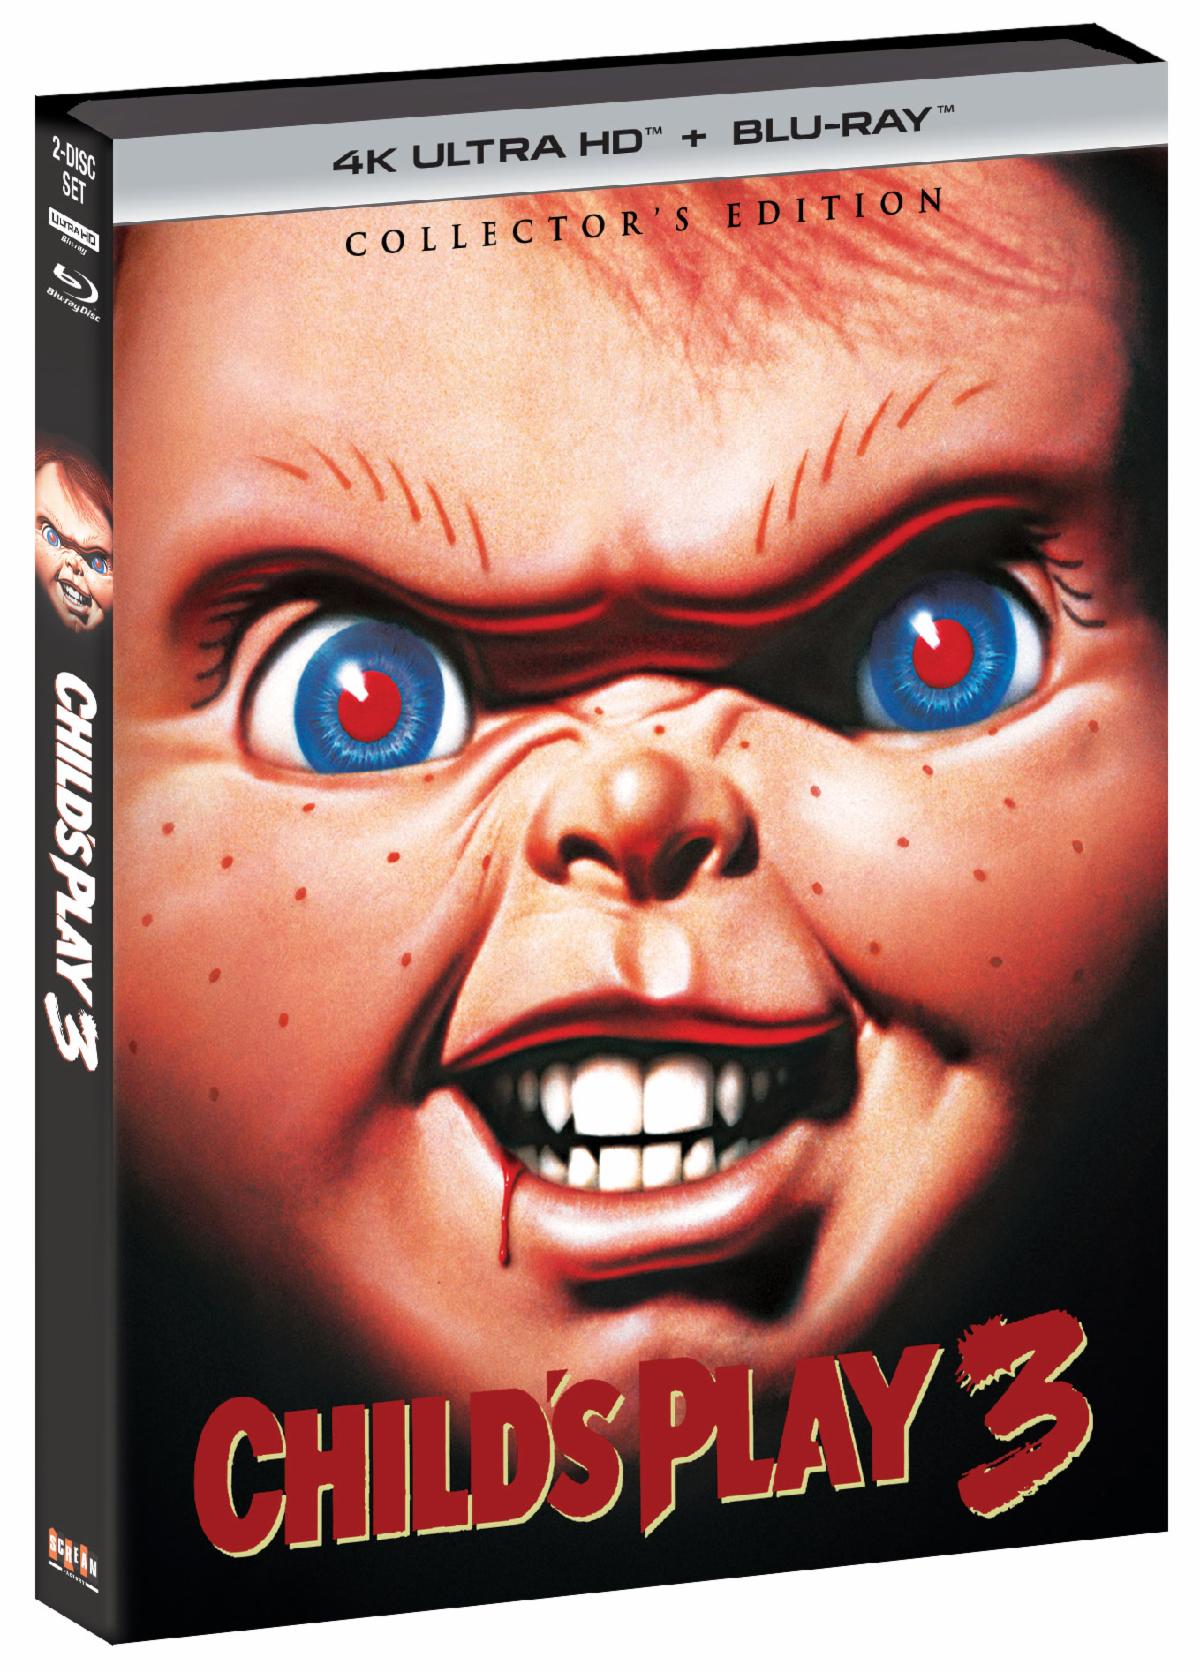 Child's Play 3 4K UHD Collector's Edition